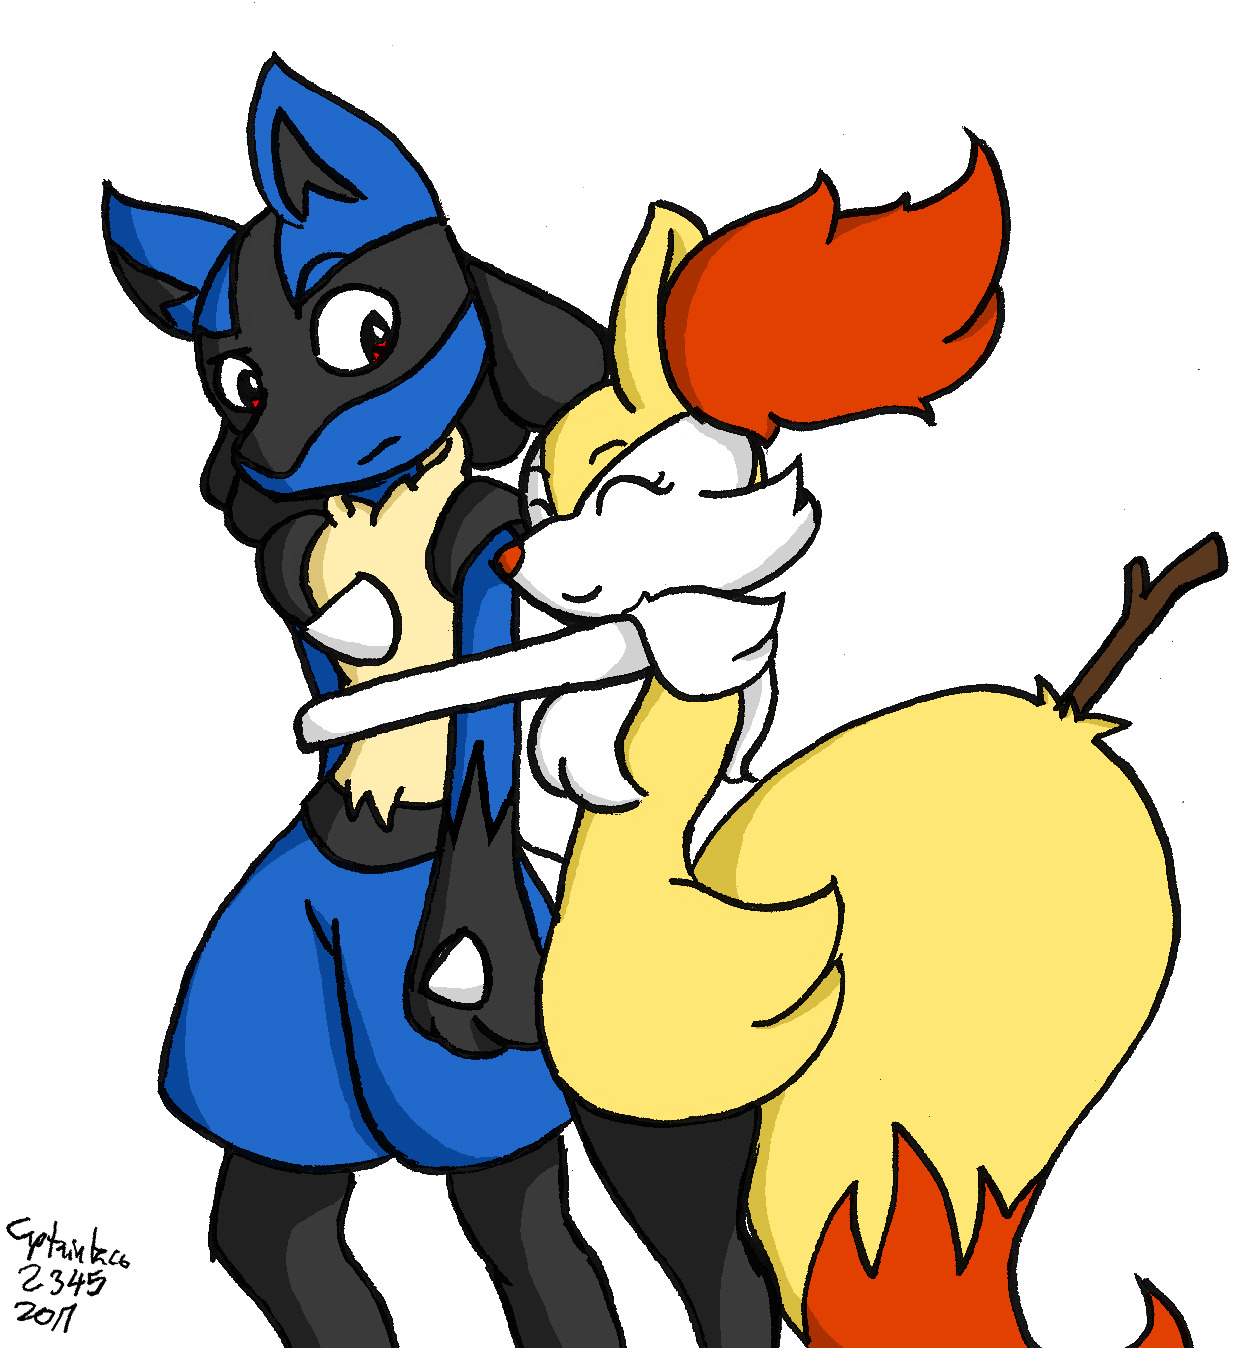 My Braixen, Ginger, hanging out with her big brother Lucario, Joshua. Apparently